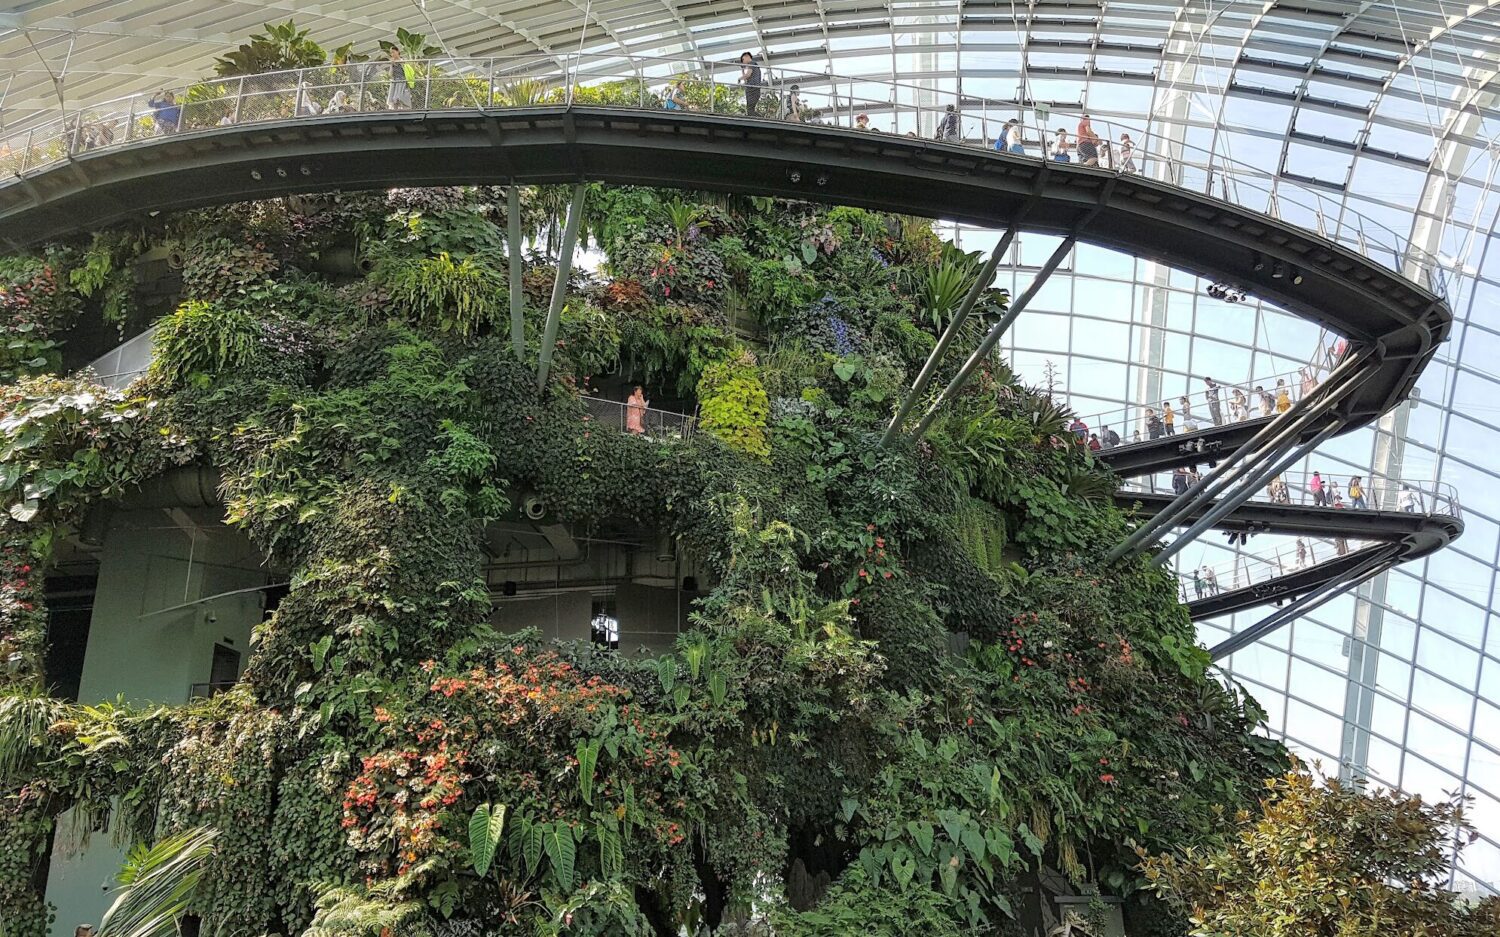 The pathway descending the 13 storey Cloud Forest Mountain in Singapore's Gardens by the Bay